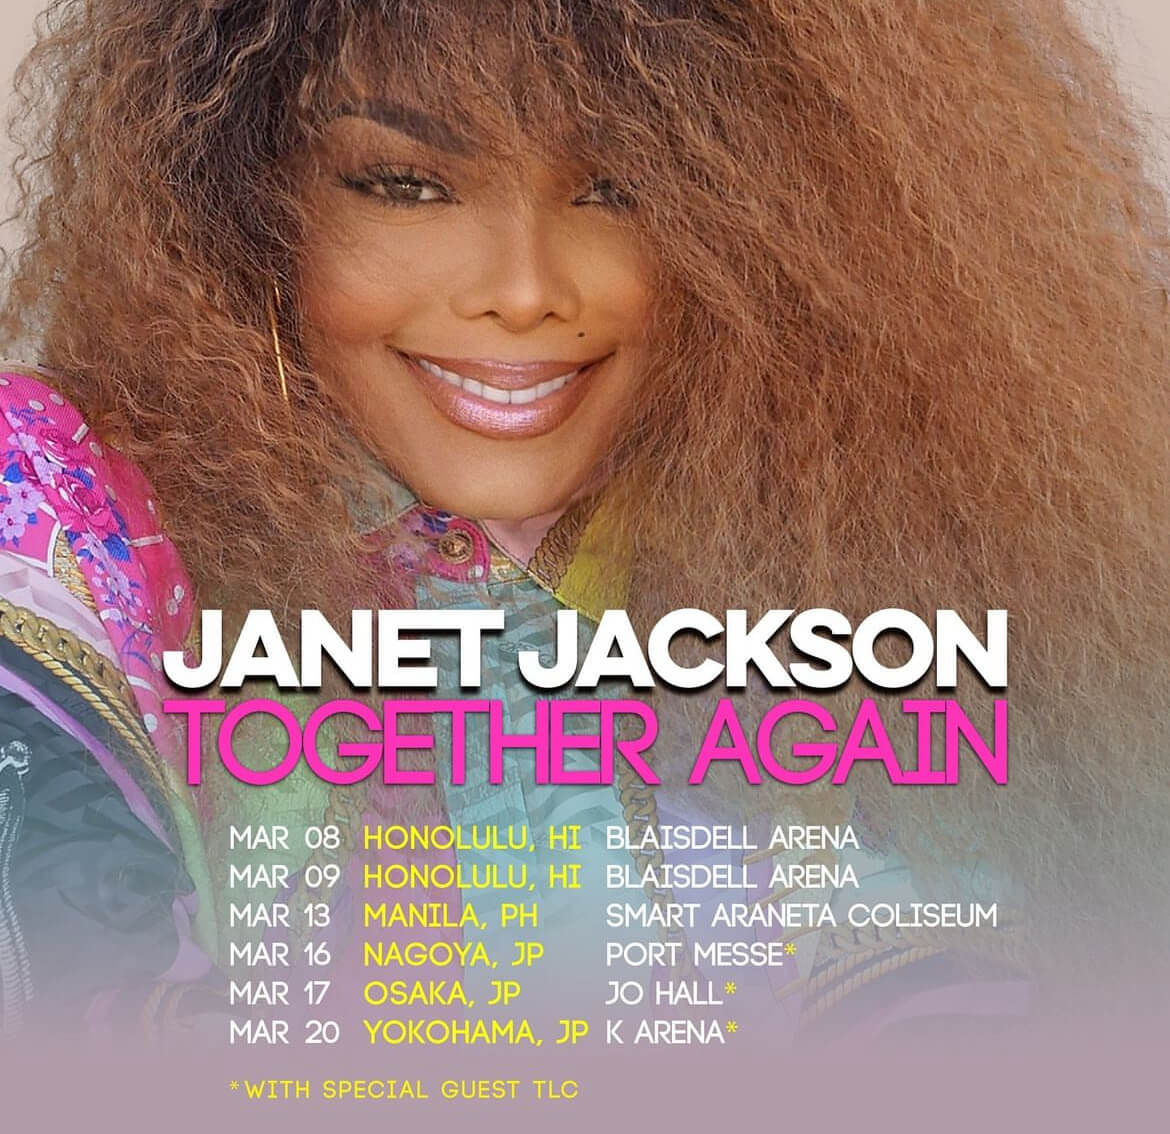 Janet Jackson's post on Instagram expressing her excitement about the upcoming shows in Manila and Japan. This adds to her tour's list of destinations. 